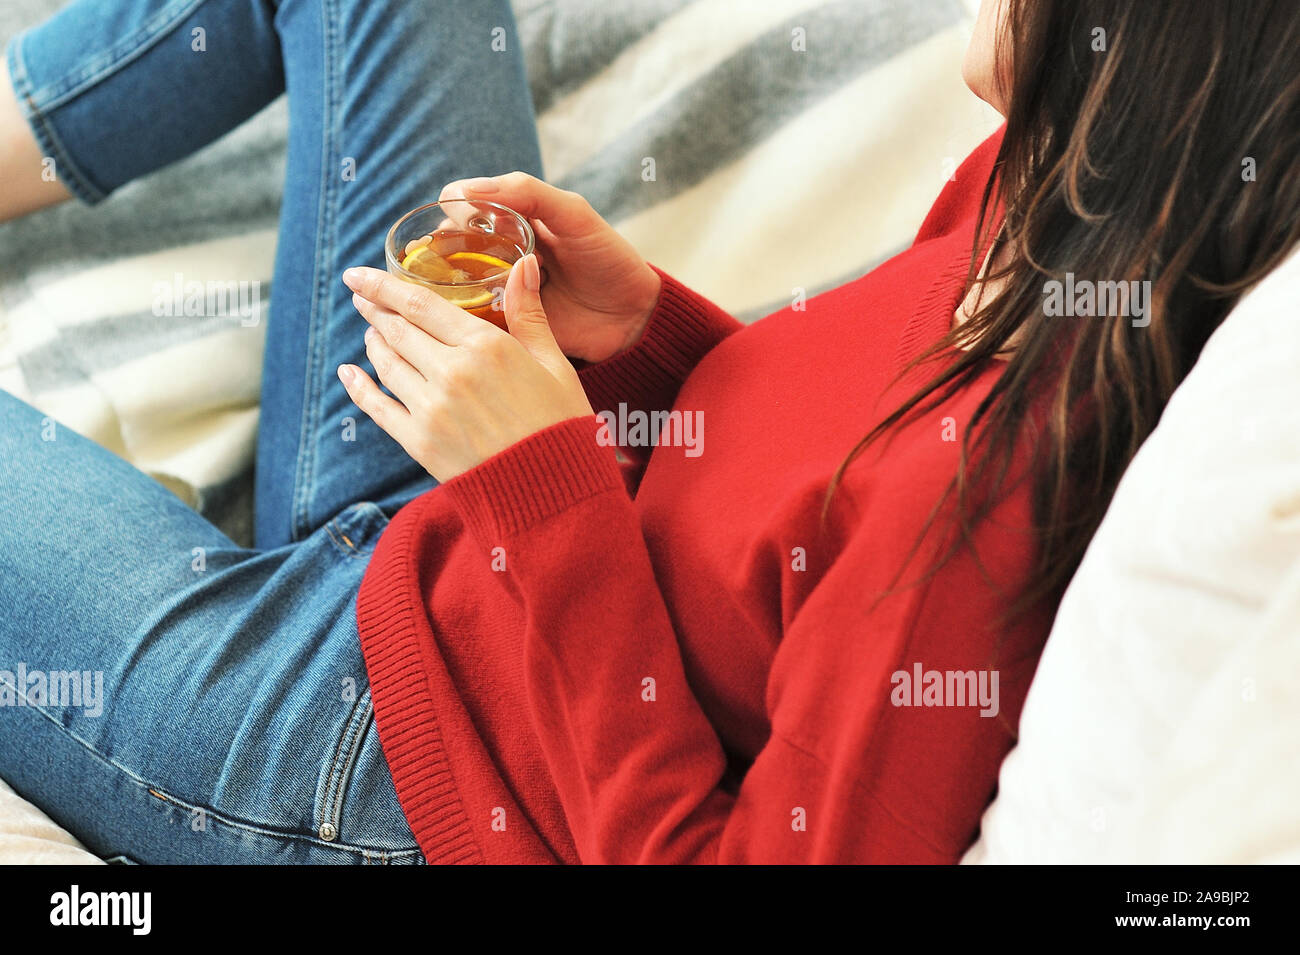 Young woman relaxing on sofa holding cup with lemon tea. Woman dreaming in living room lying on couch. Woman thinking while drinking lemon tea at home Stock Photo